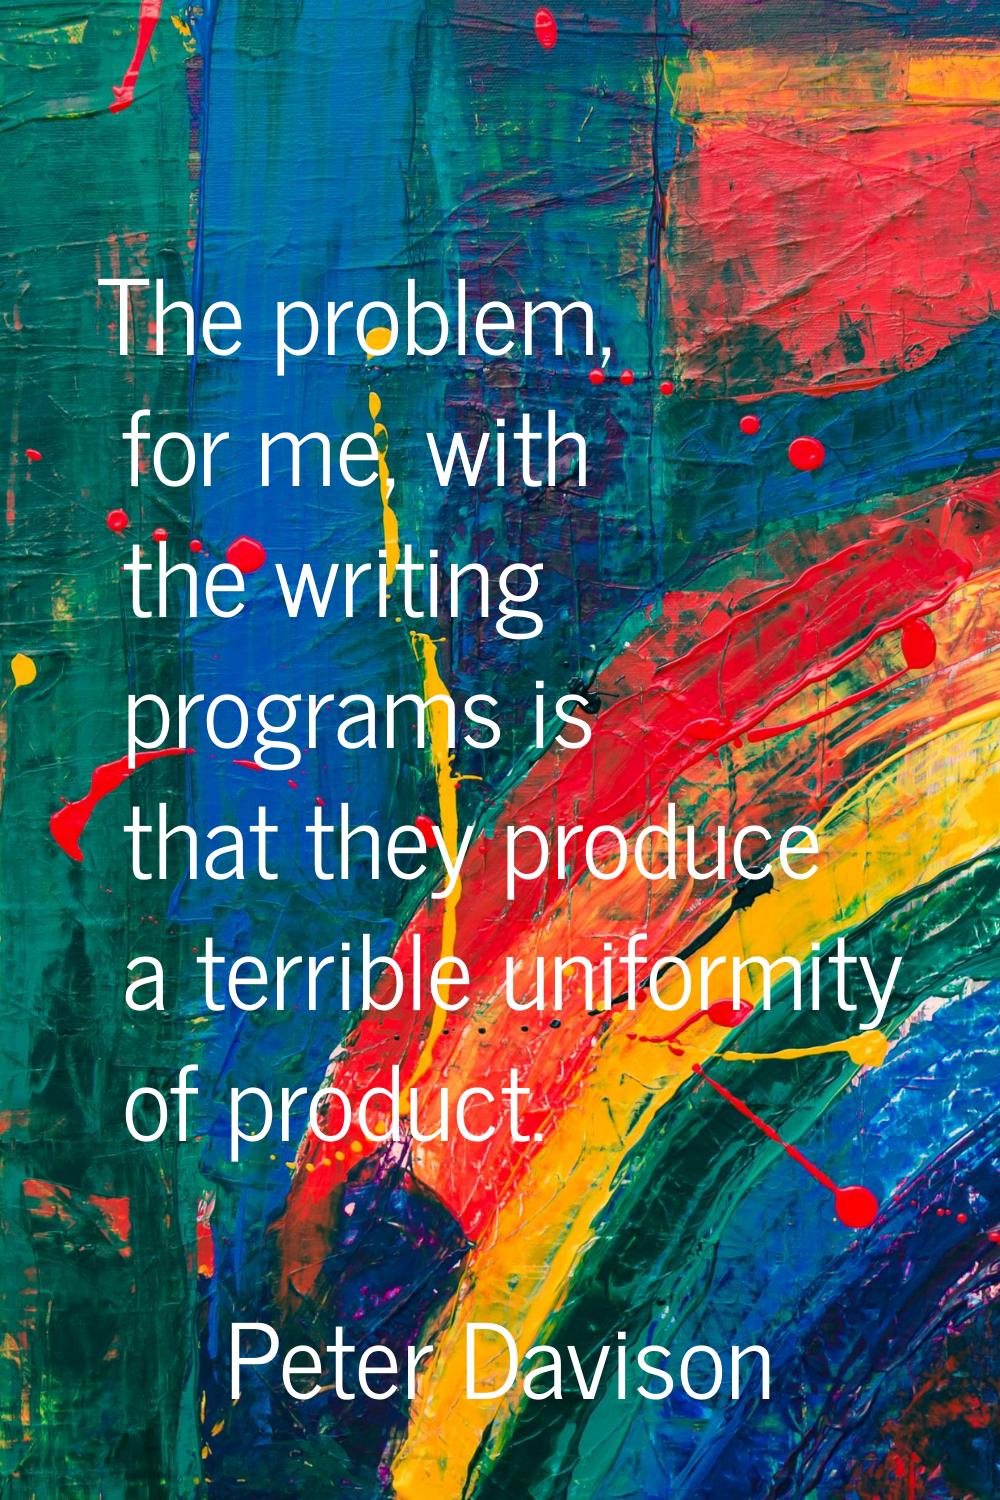 The problem, for me, with the writing programs is that they produce a terrible uniformity of produc